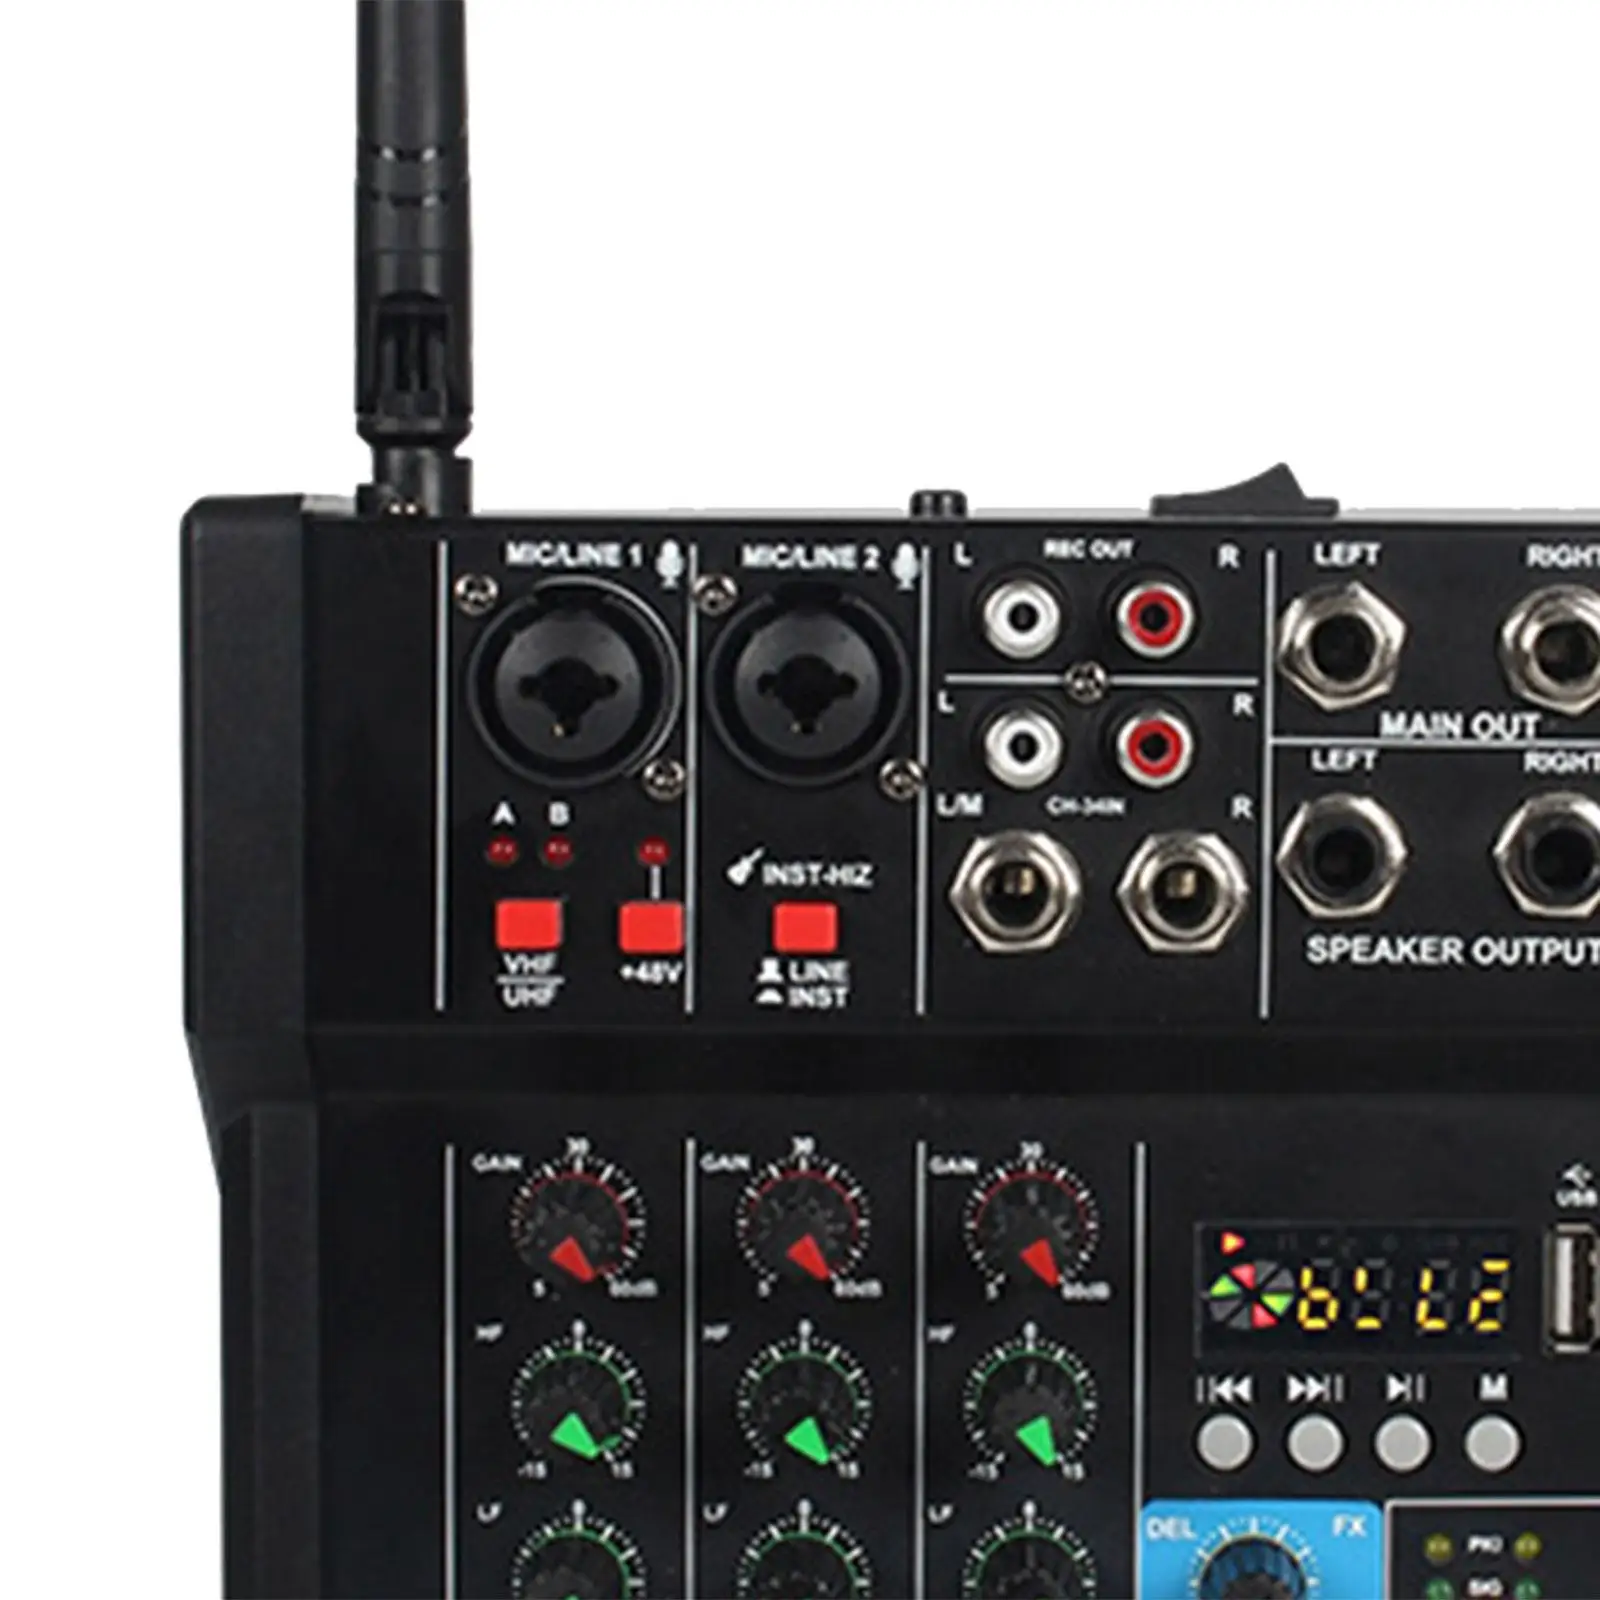 Audio Mixer Amplifier with Dual Wireless Mic 4 Channel Portable Sound Mixer for DJ Mixing Karaoke Recording Live Streaming